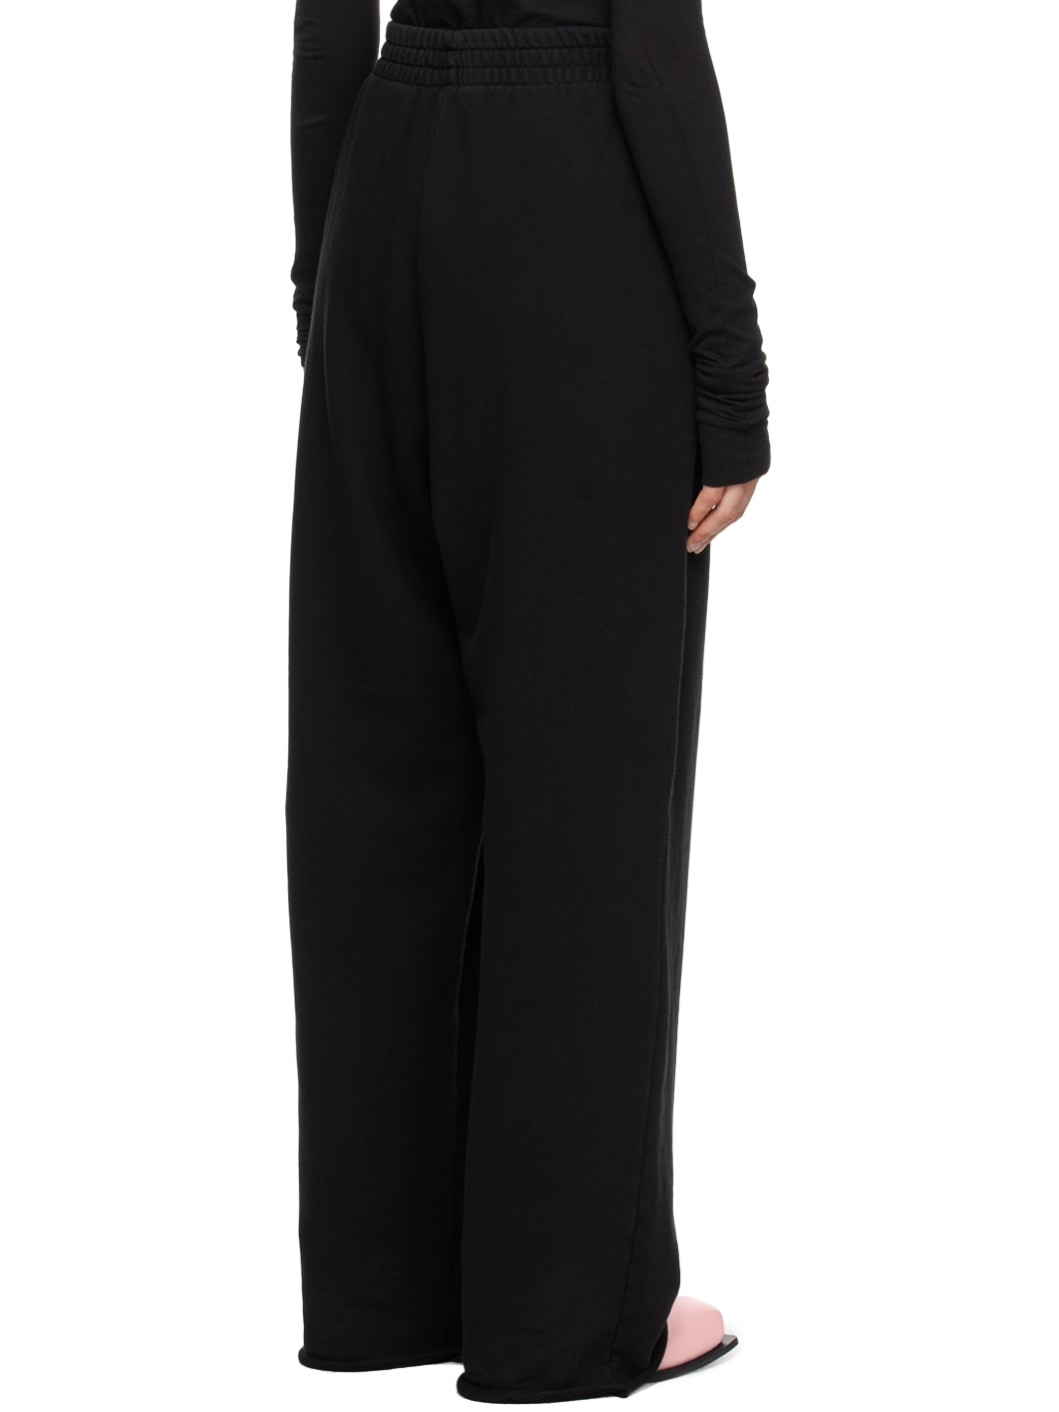 Black Embroidered Lounge Pants - 3